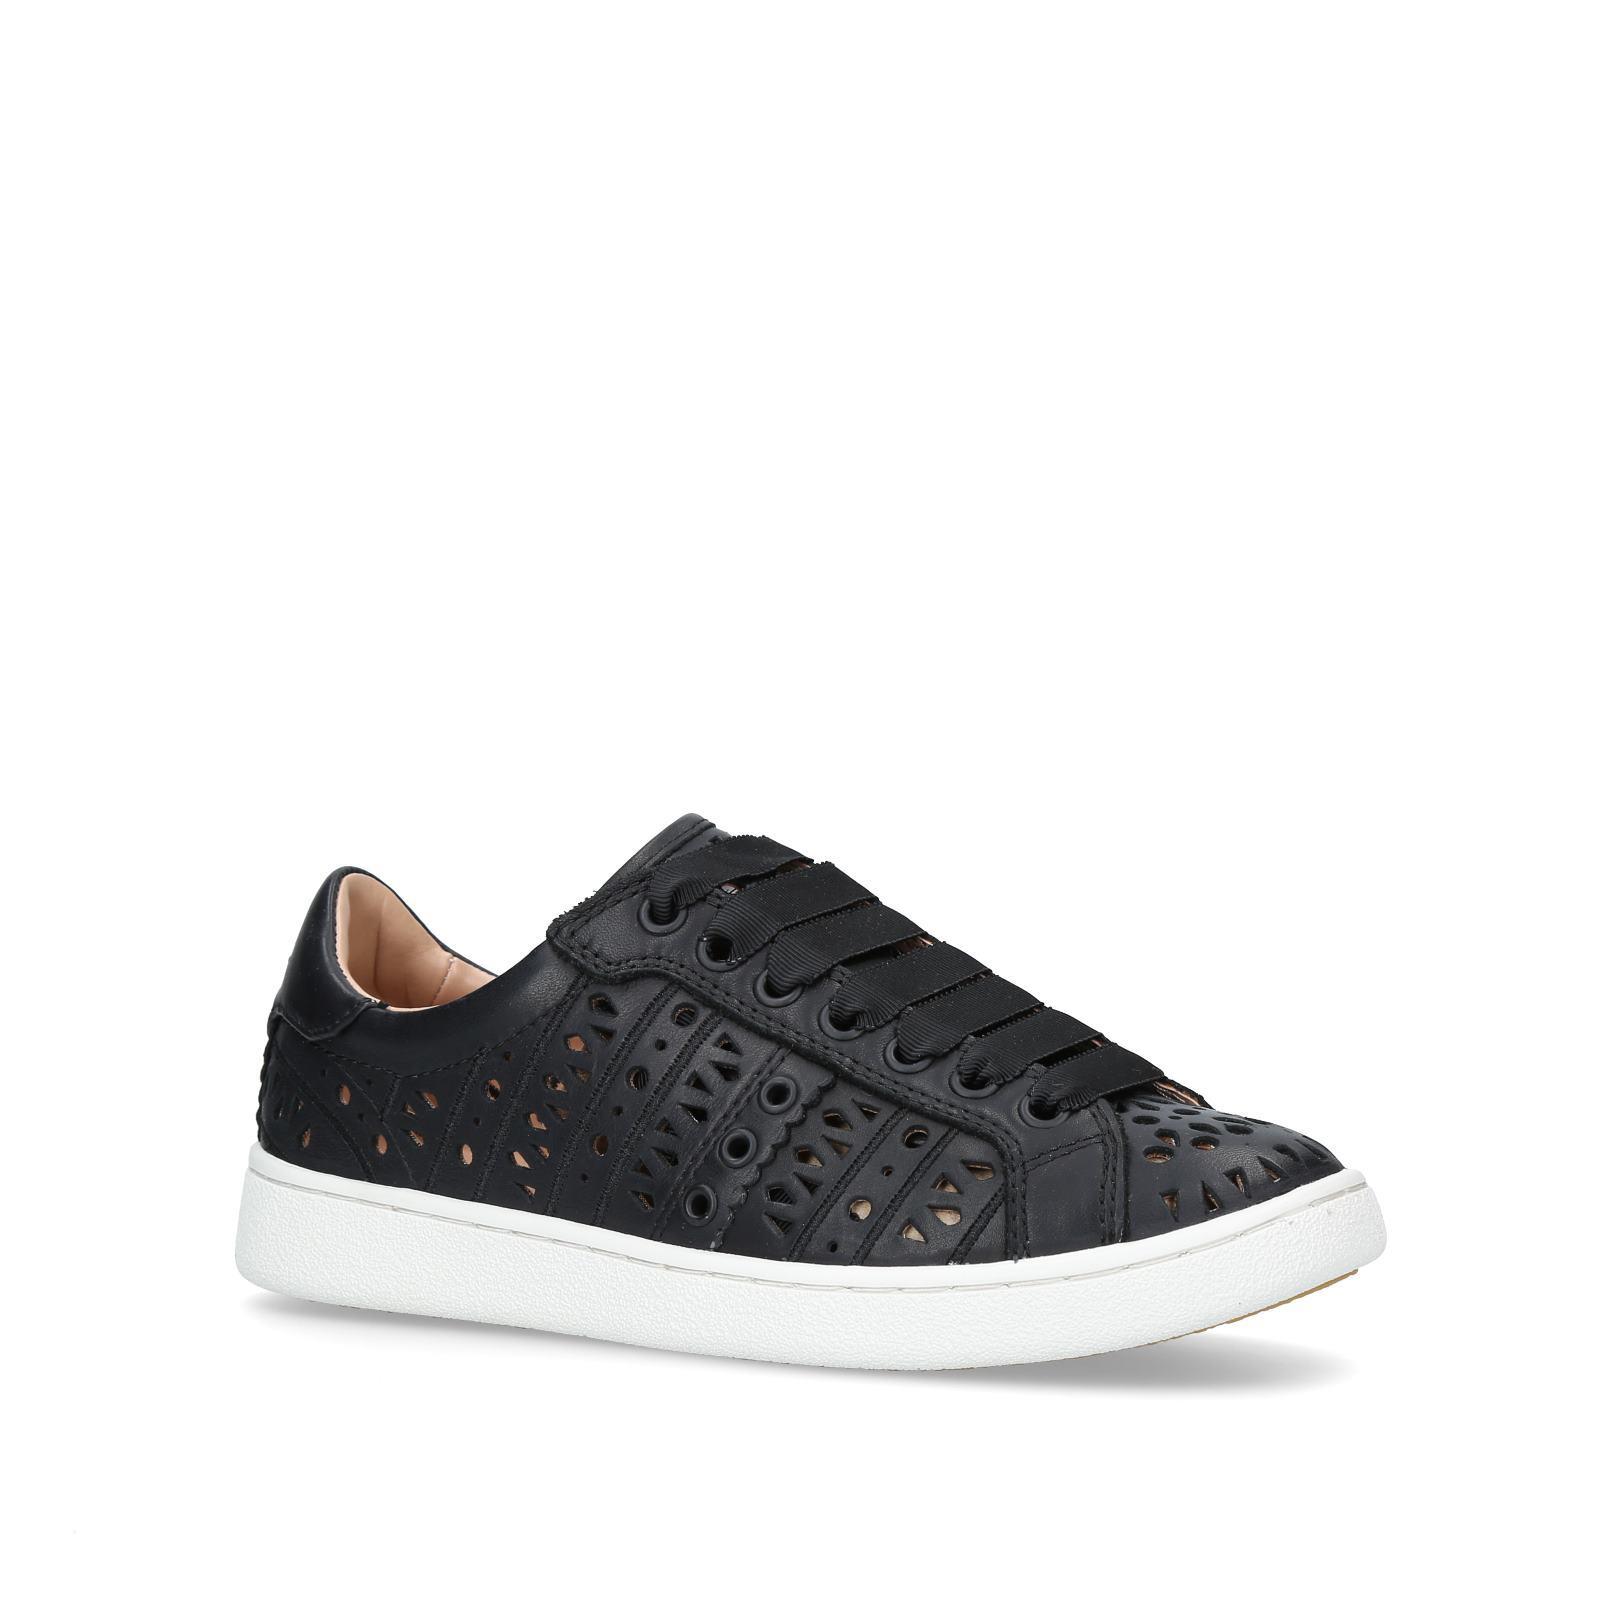 UGG Leather Milo Perf Sneakers Black - Lyst